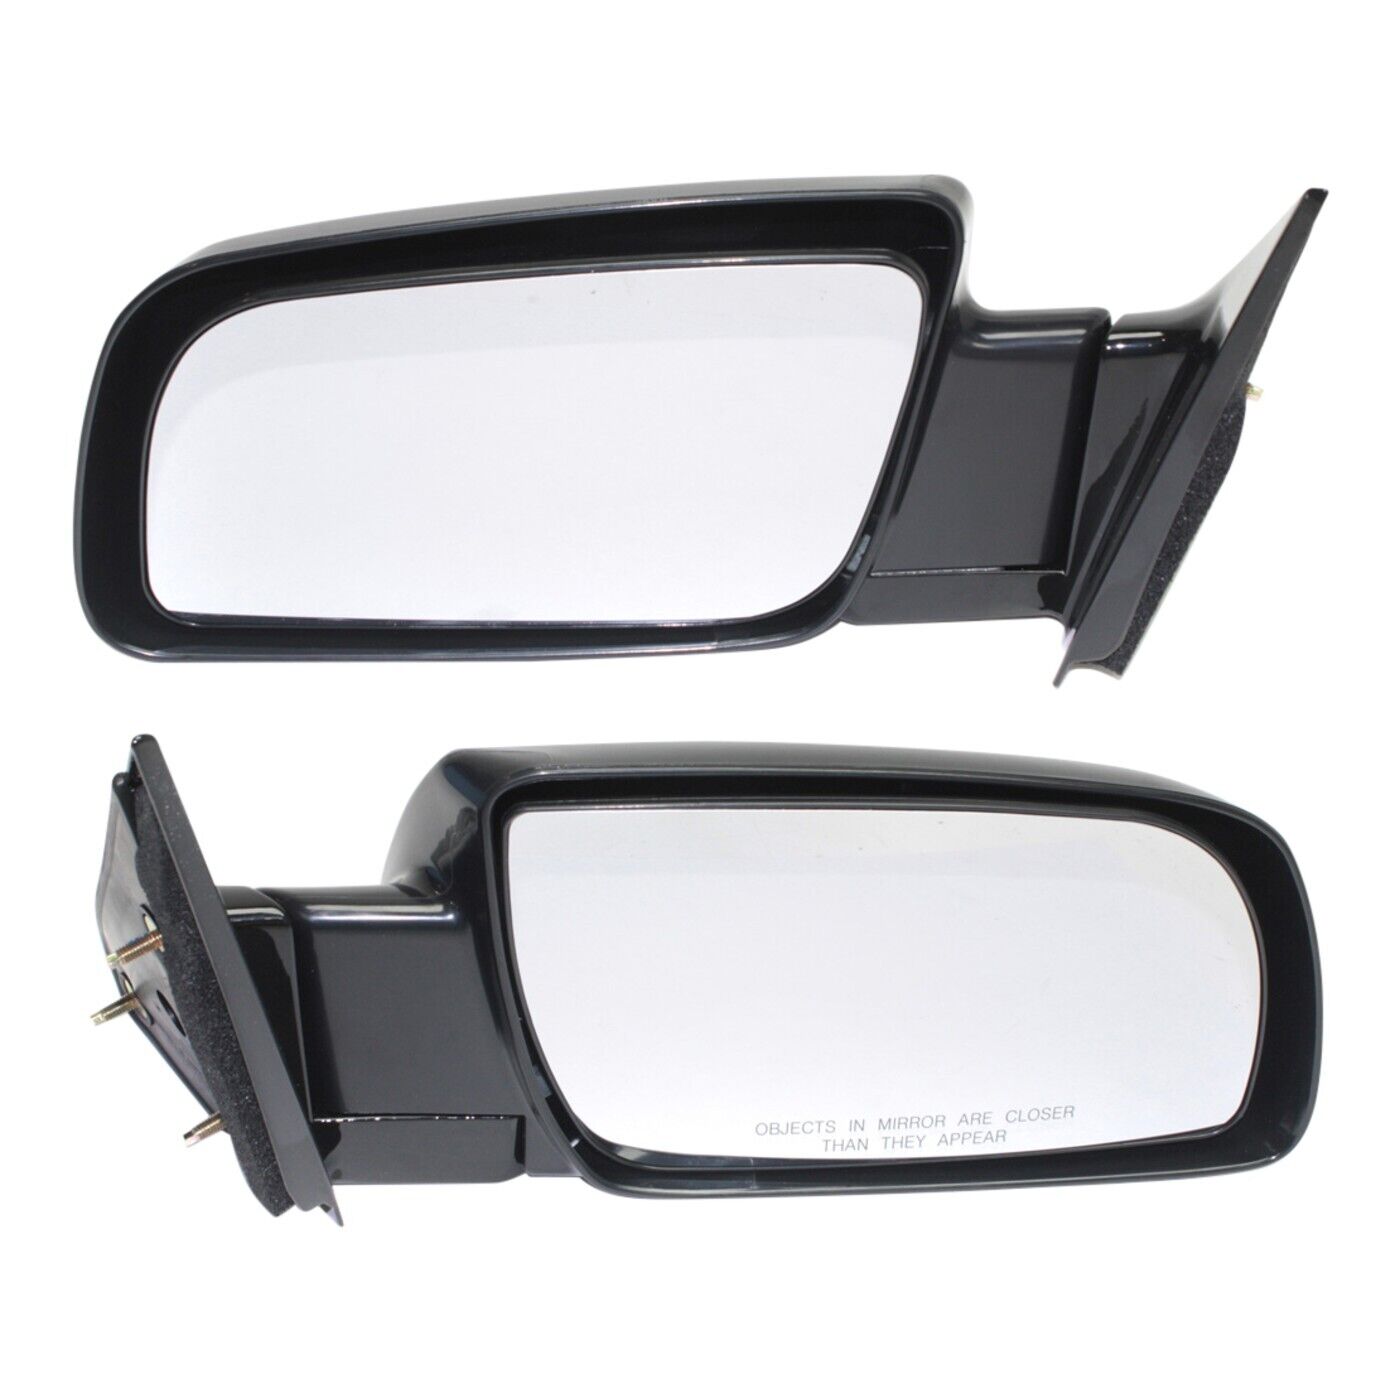 Manual Black Side Mirrors Left LH & Right RH Pair Set of 2 for Pickup Truck